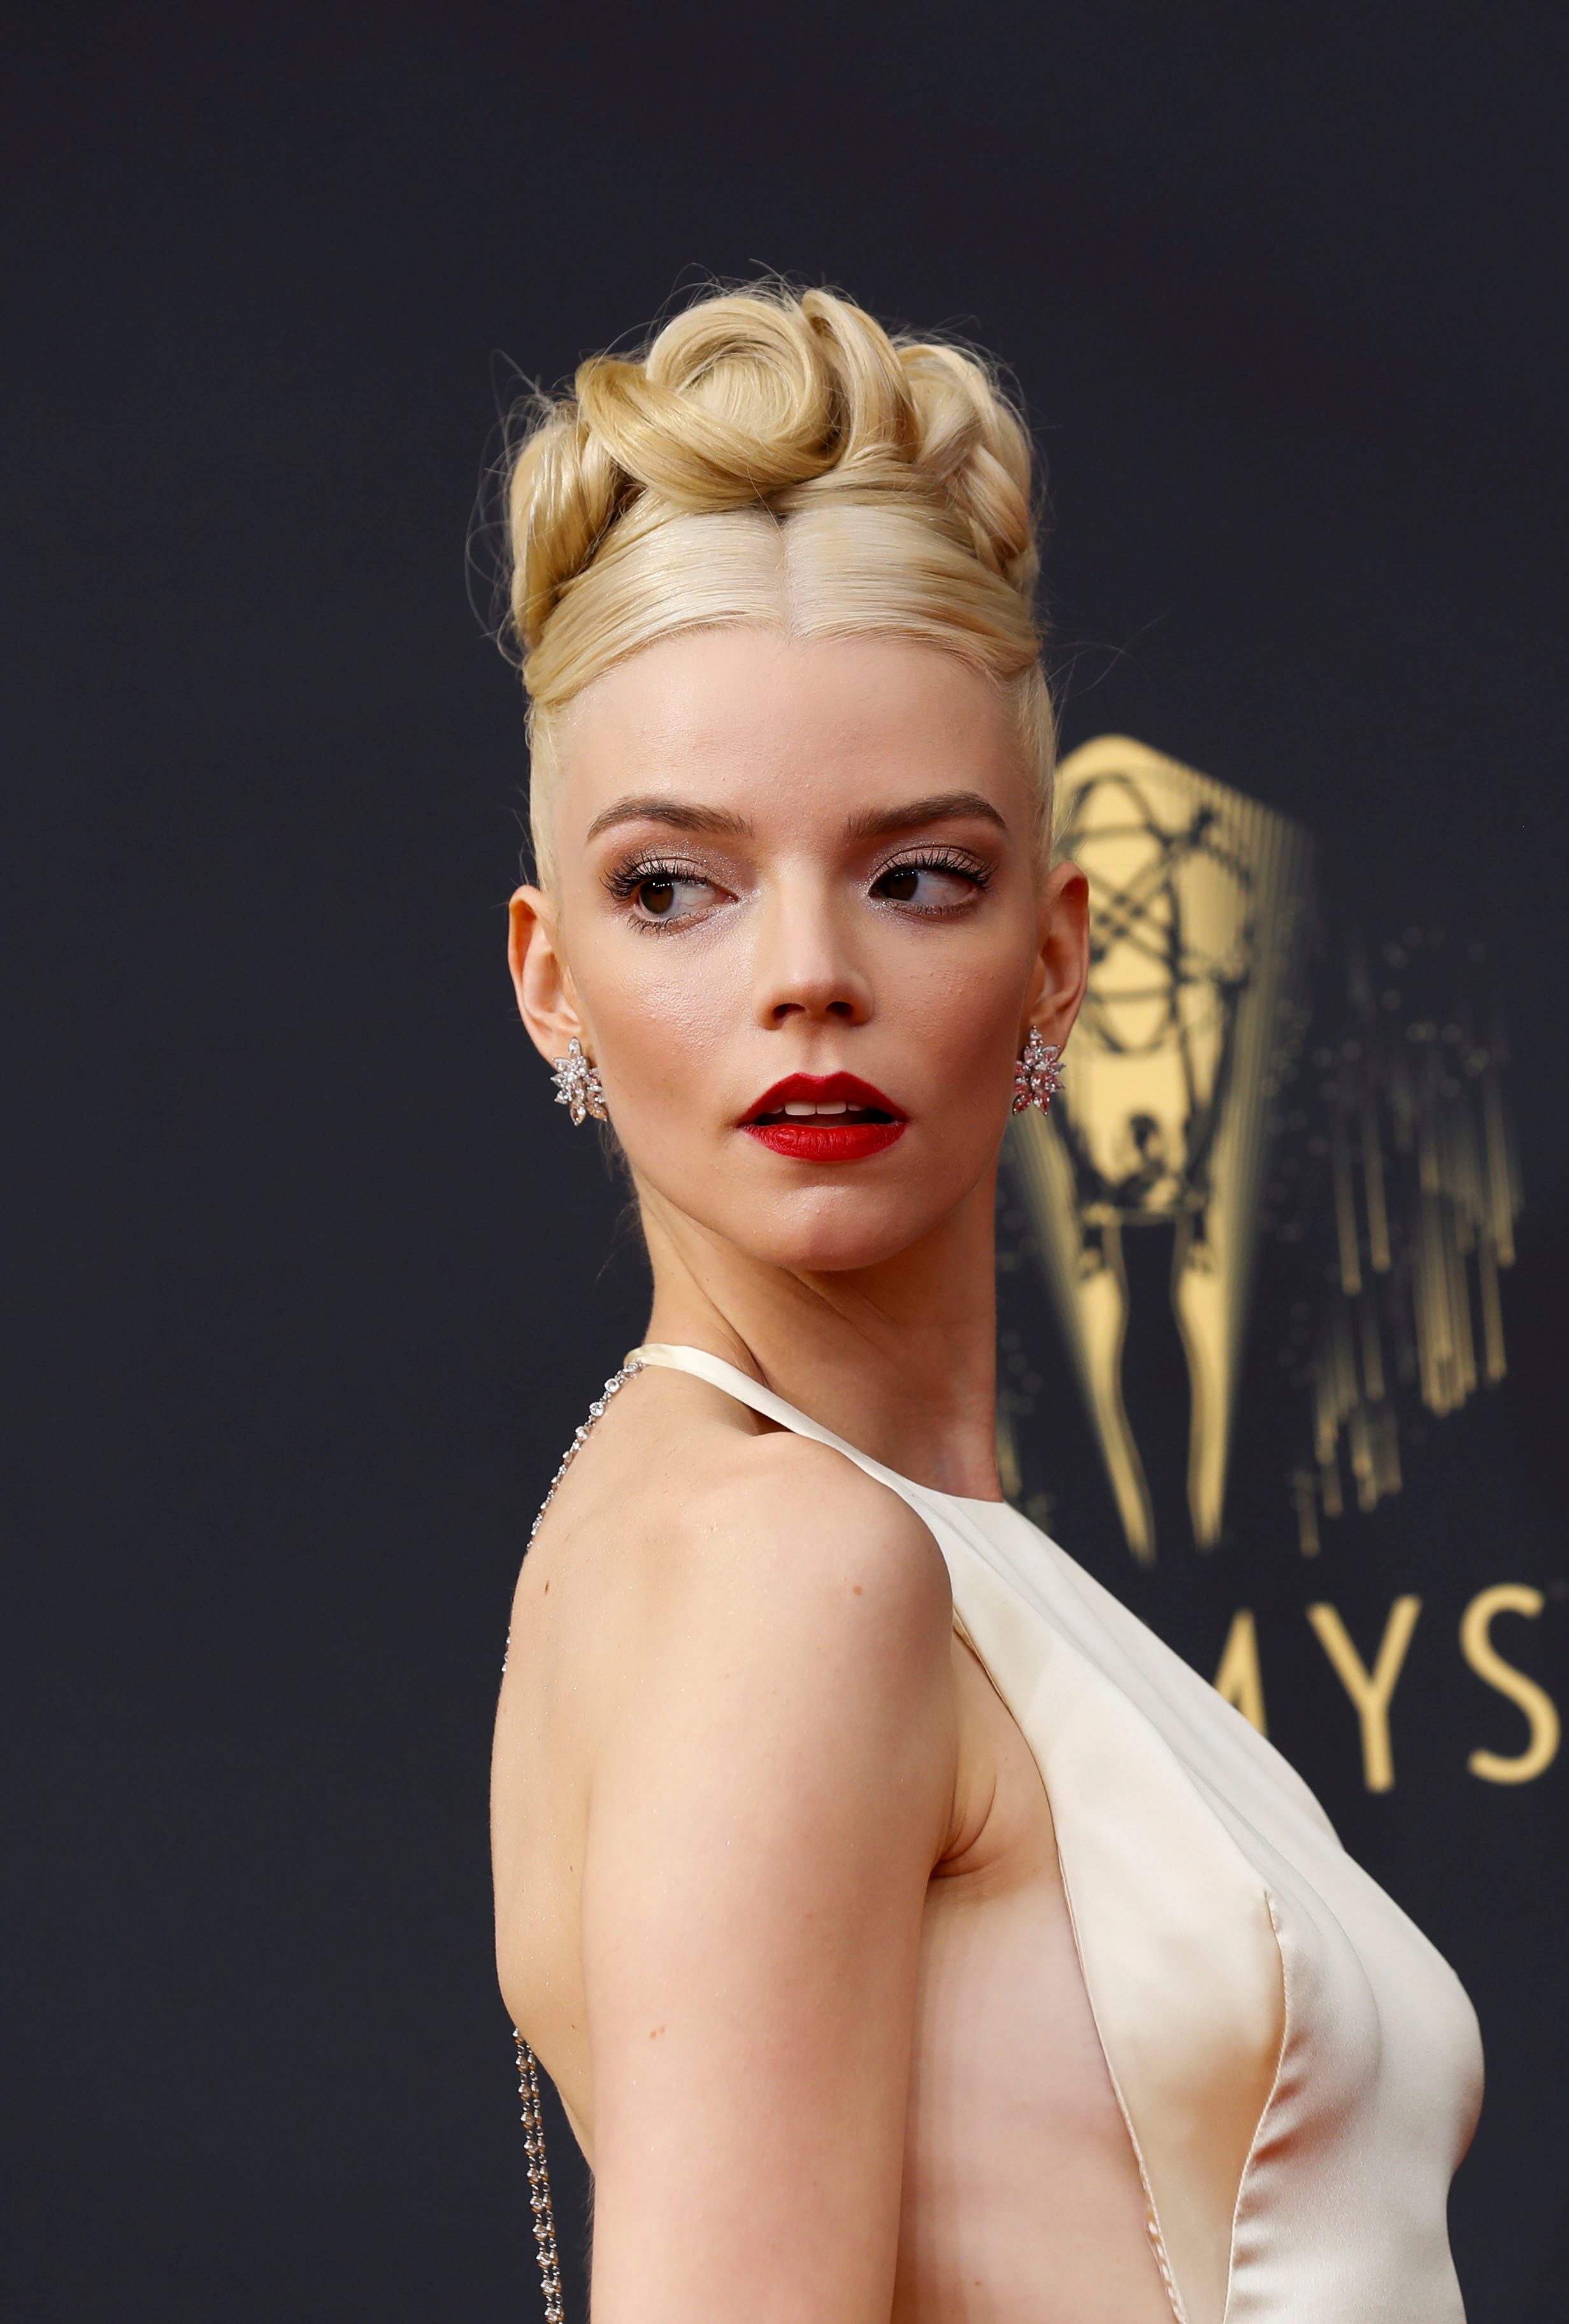 LOOK: Anya Taylor-Joy is a showstopper at the 2021 Emmy Awards